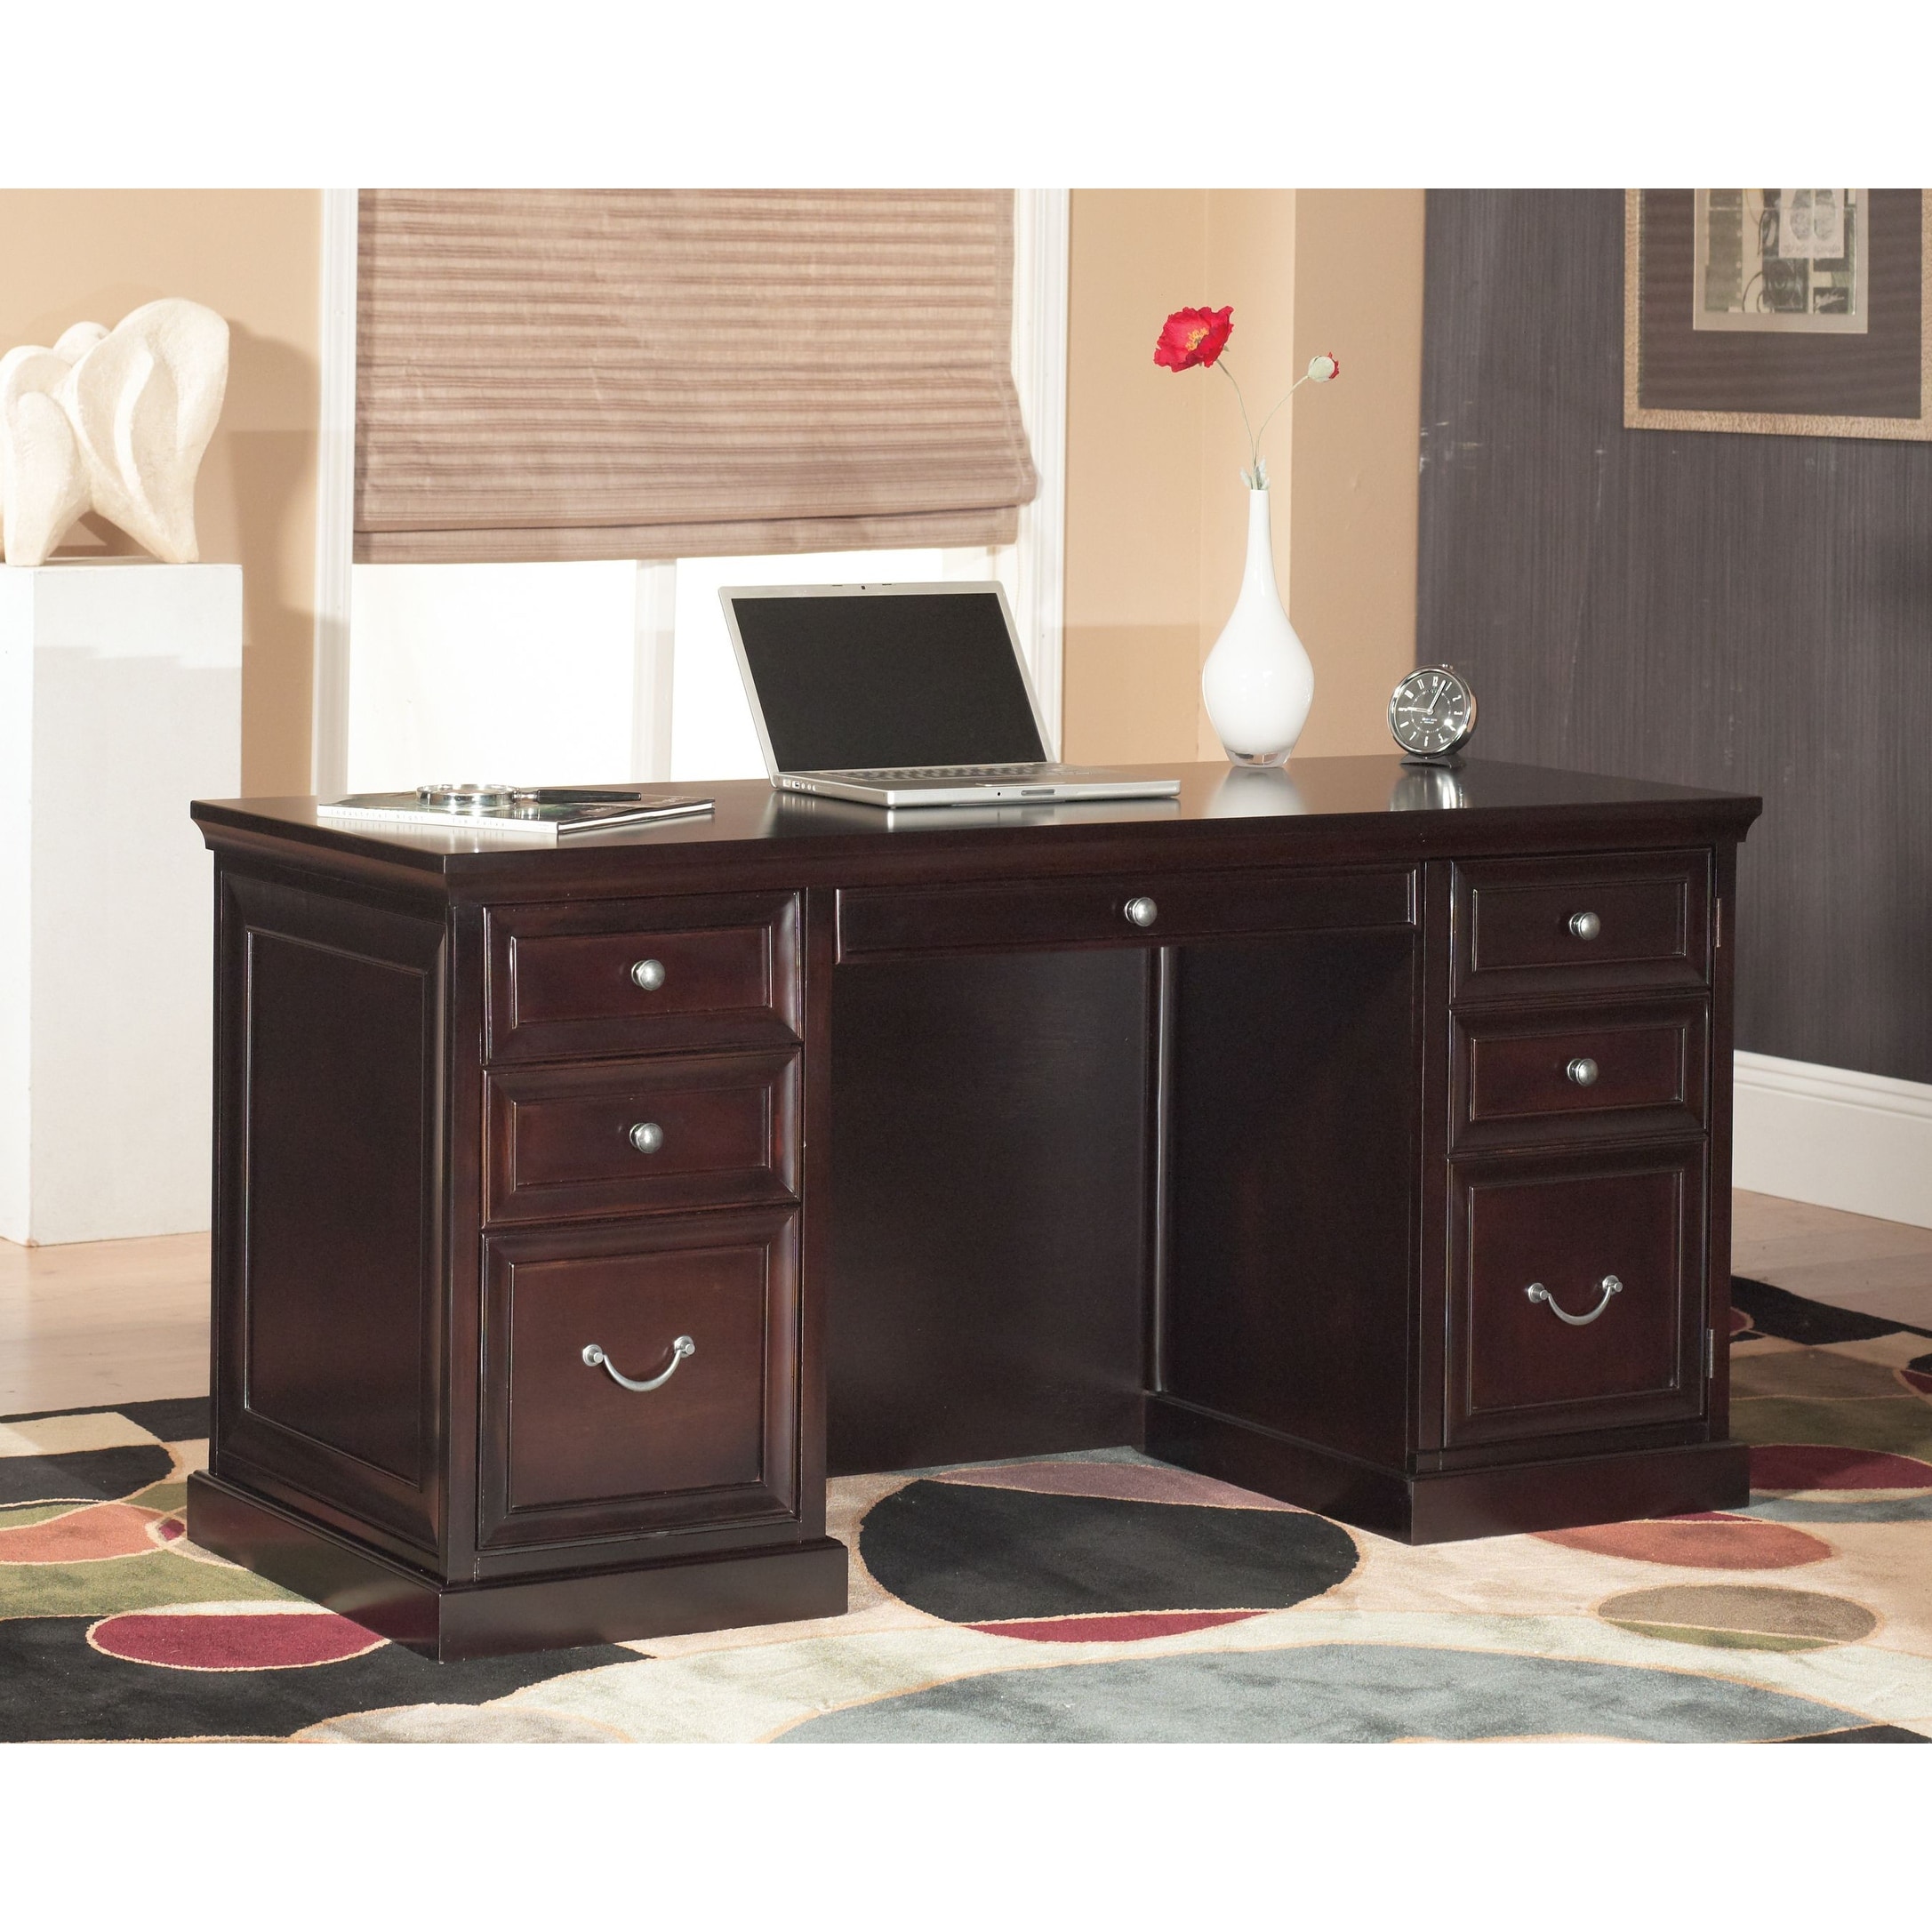 68" Executive Wood Desk, Office Desk, Writing Table, Brown